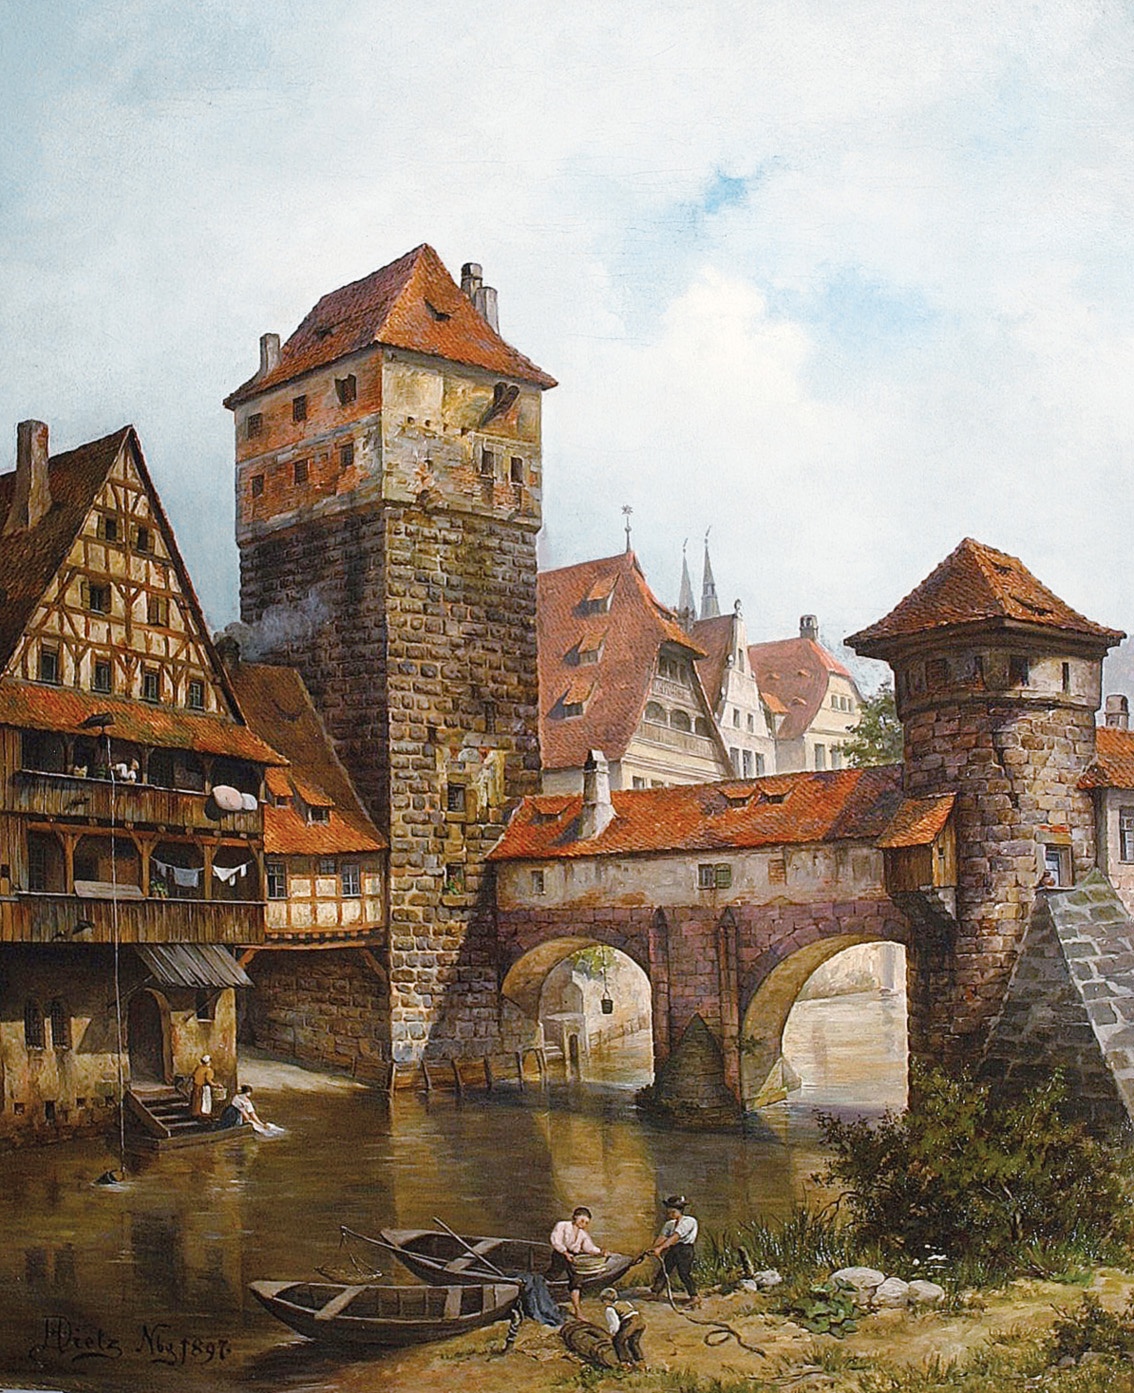 A view of Nuremberg